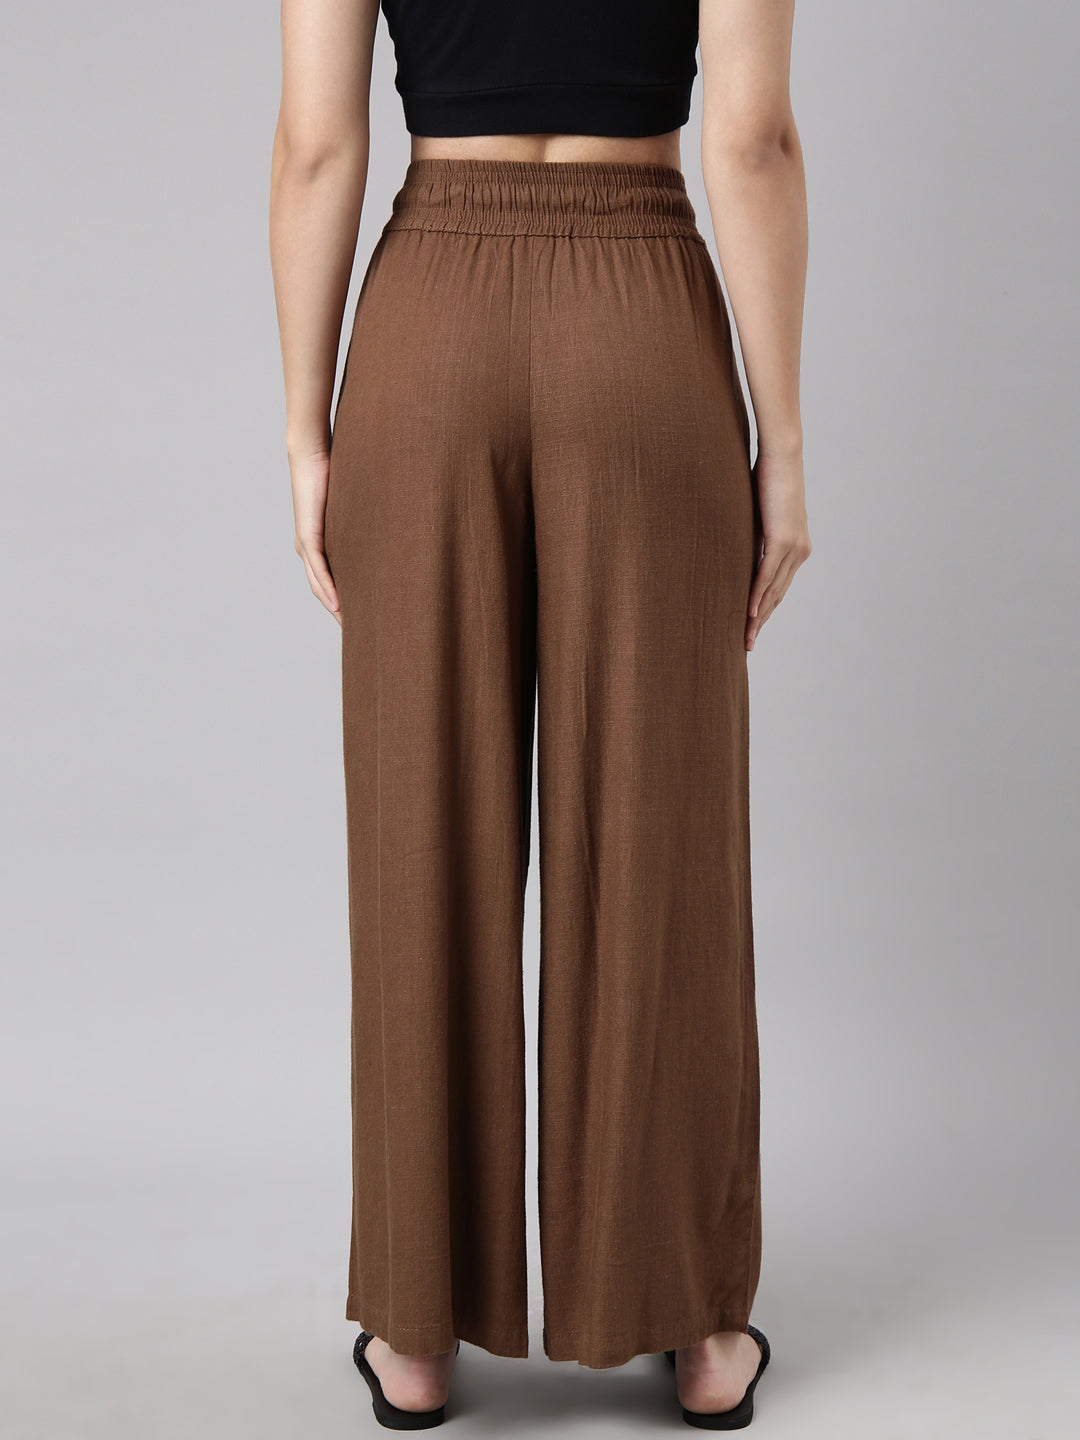 Women Solid Brown Wide Leg Palazzos